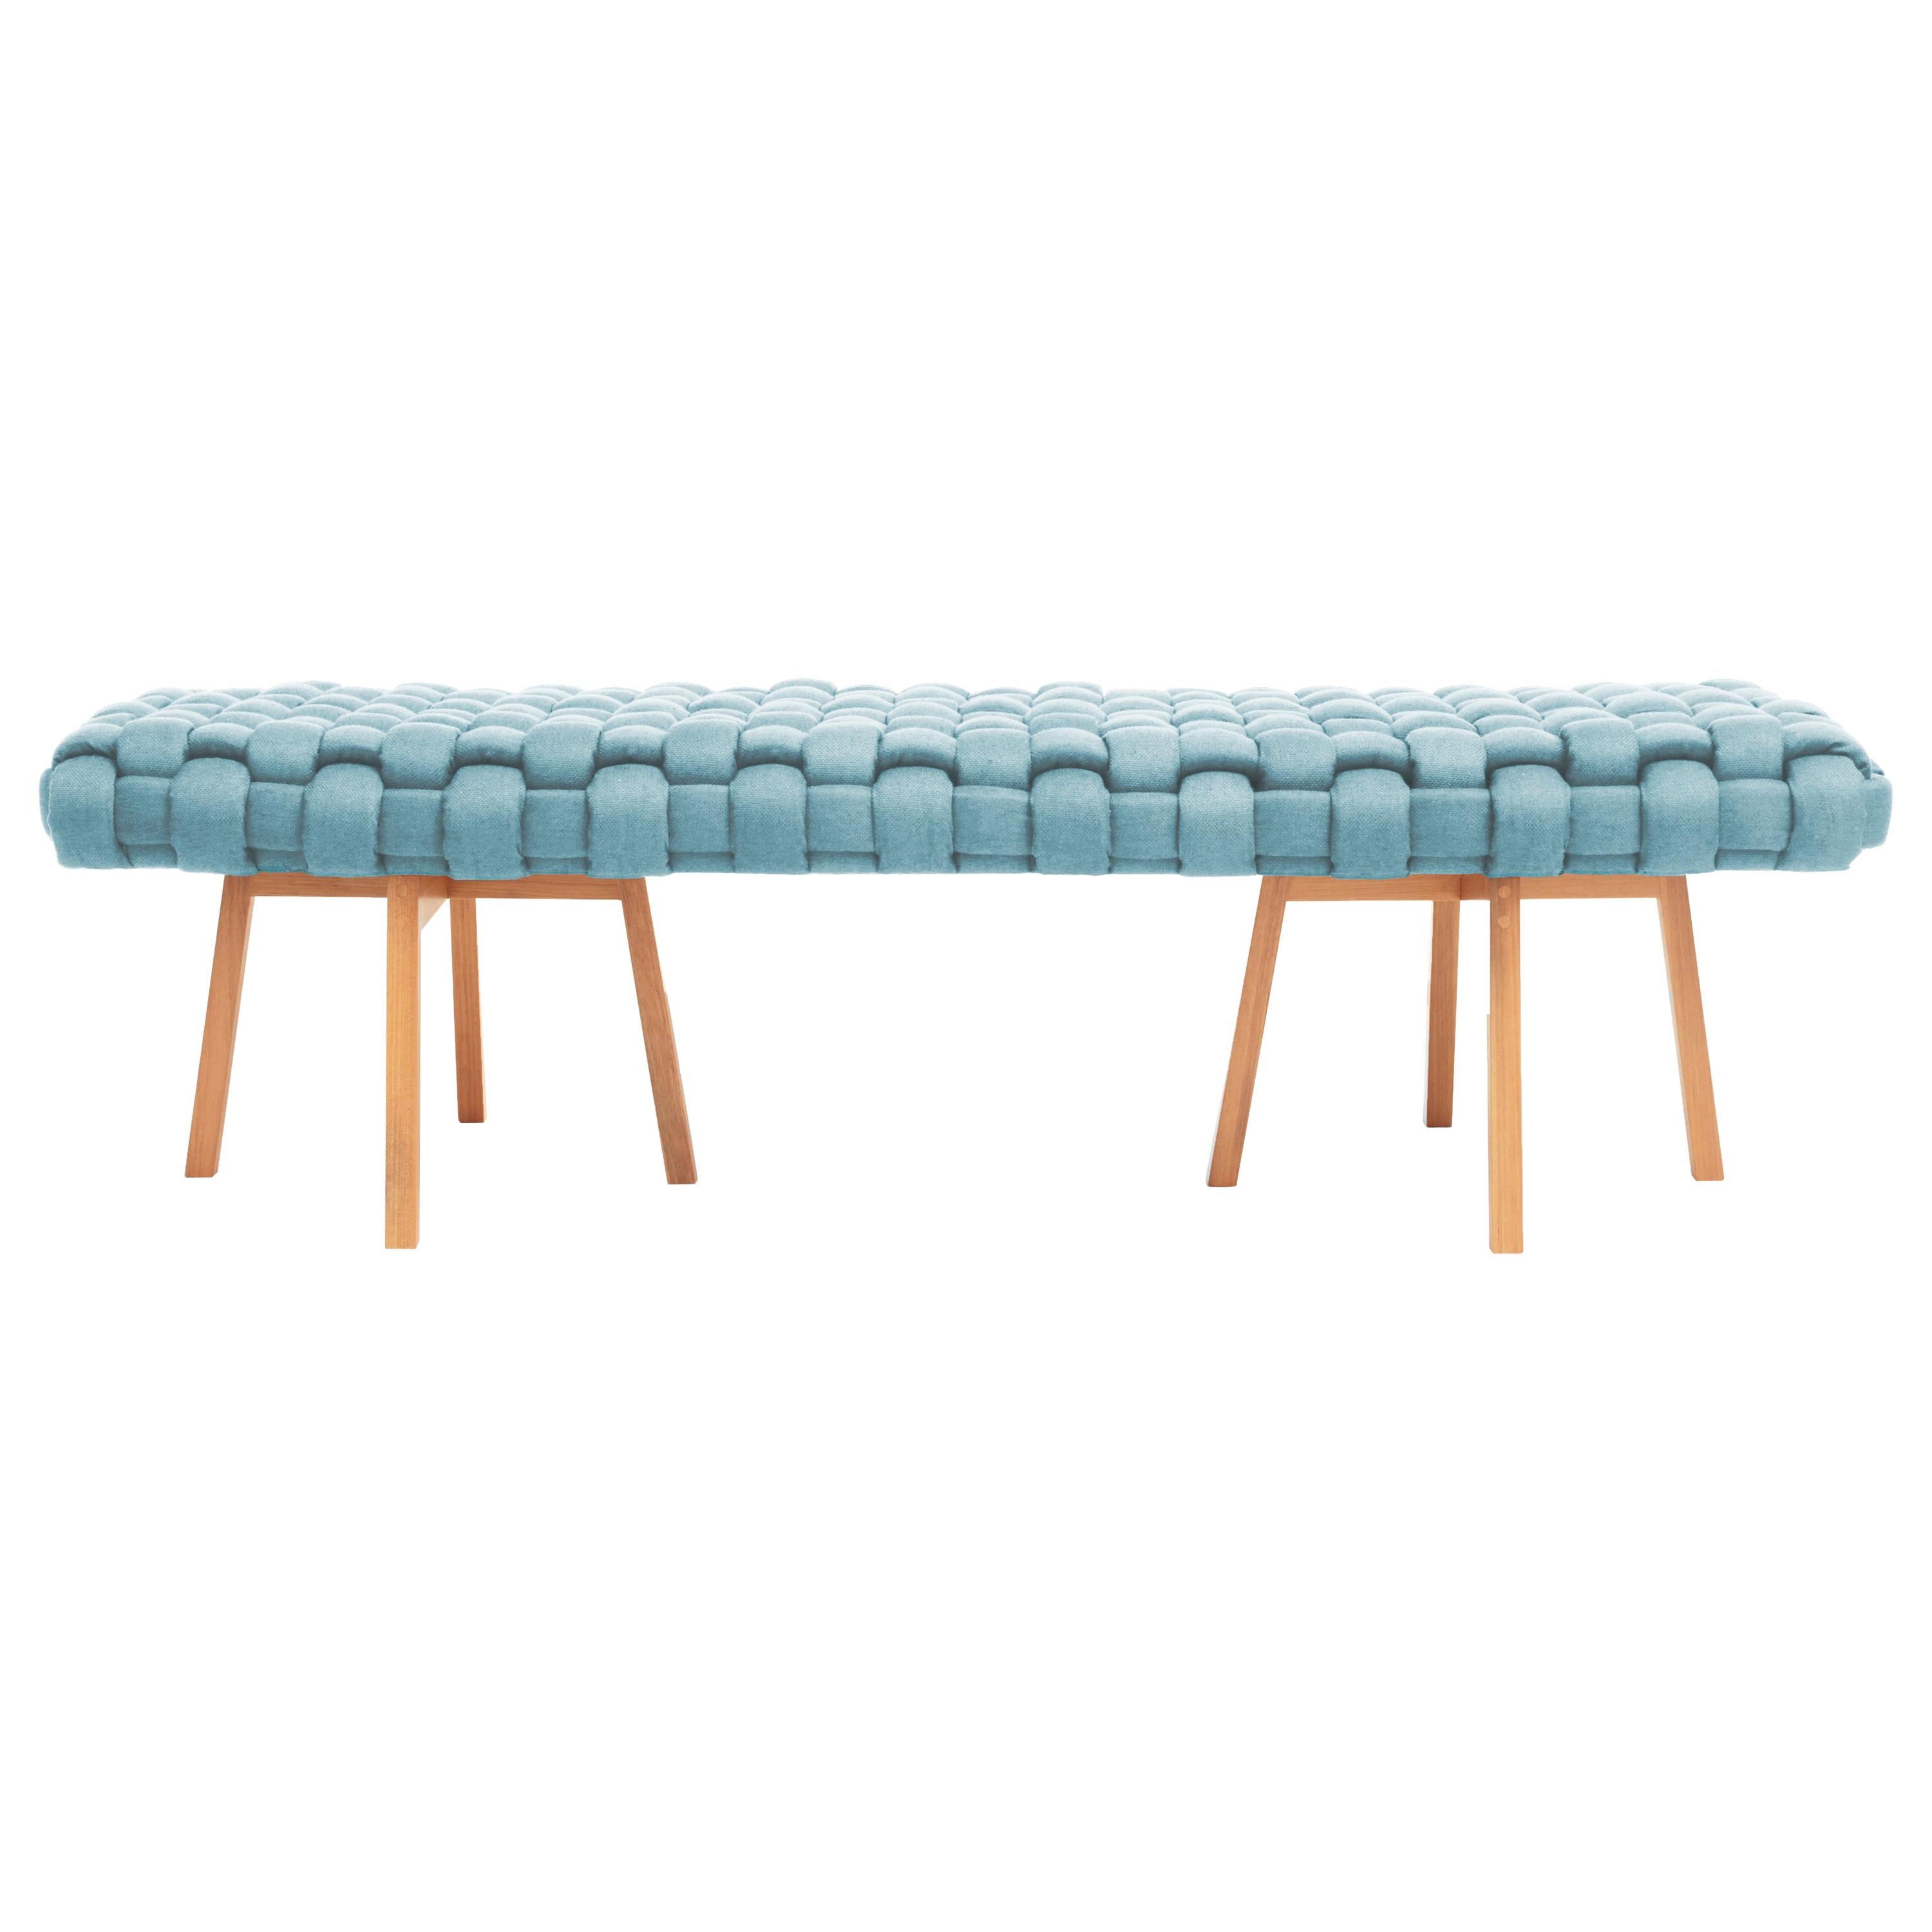 Contemporary Wood Bench, Handwoven Upholstery, the "Trama", Blue For Sale